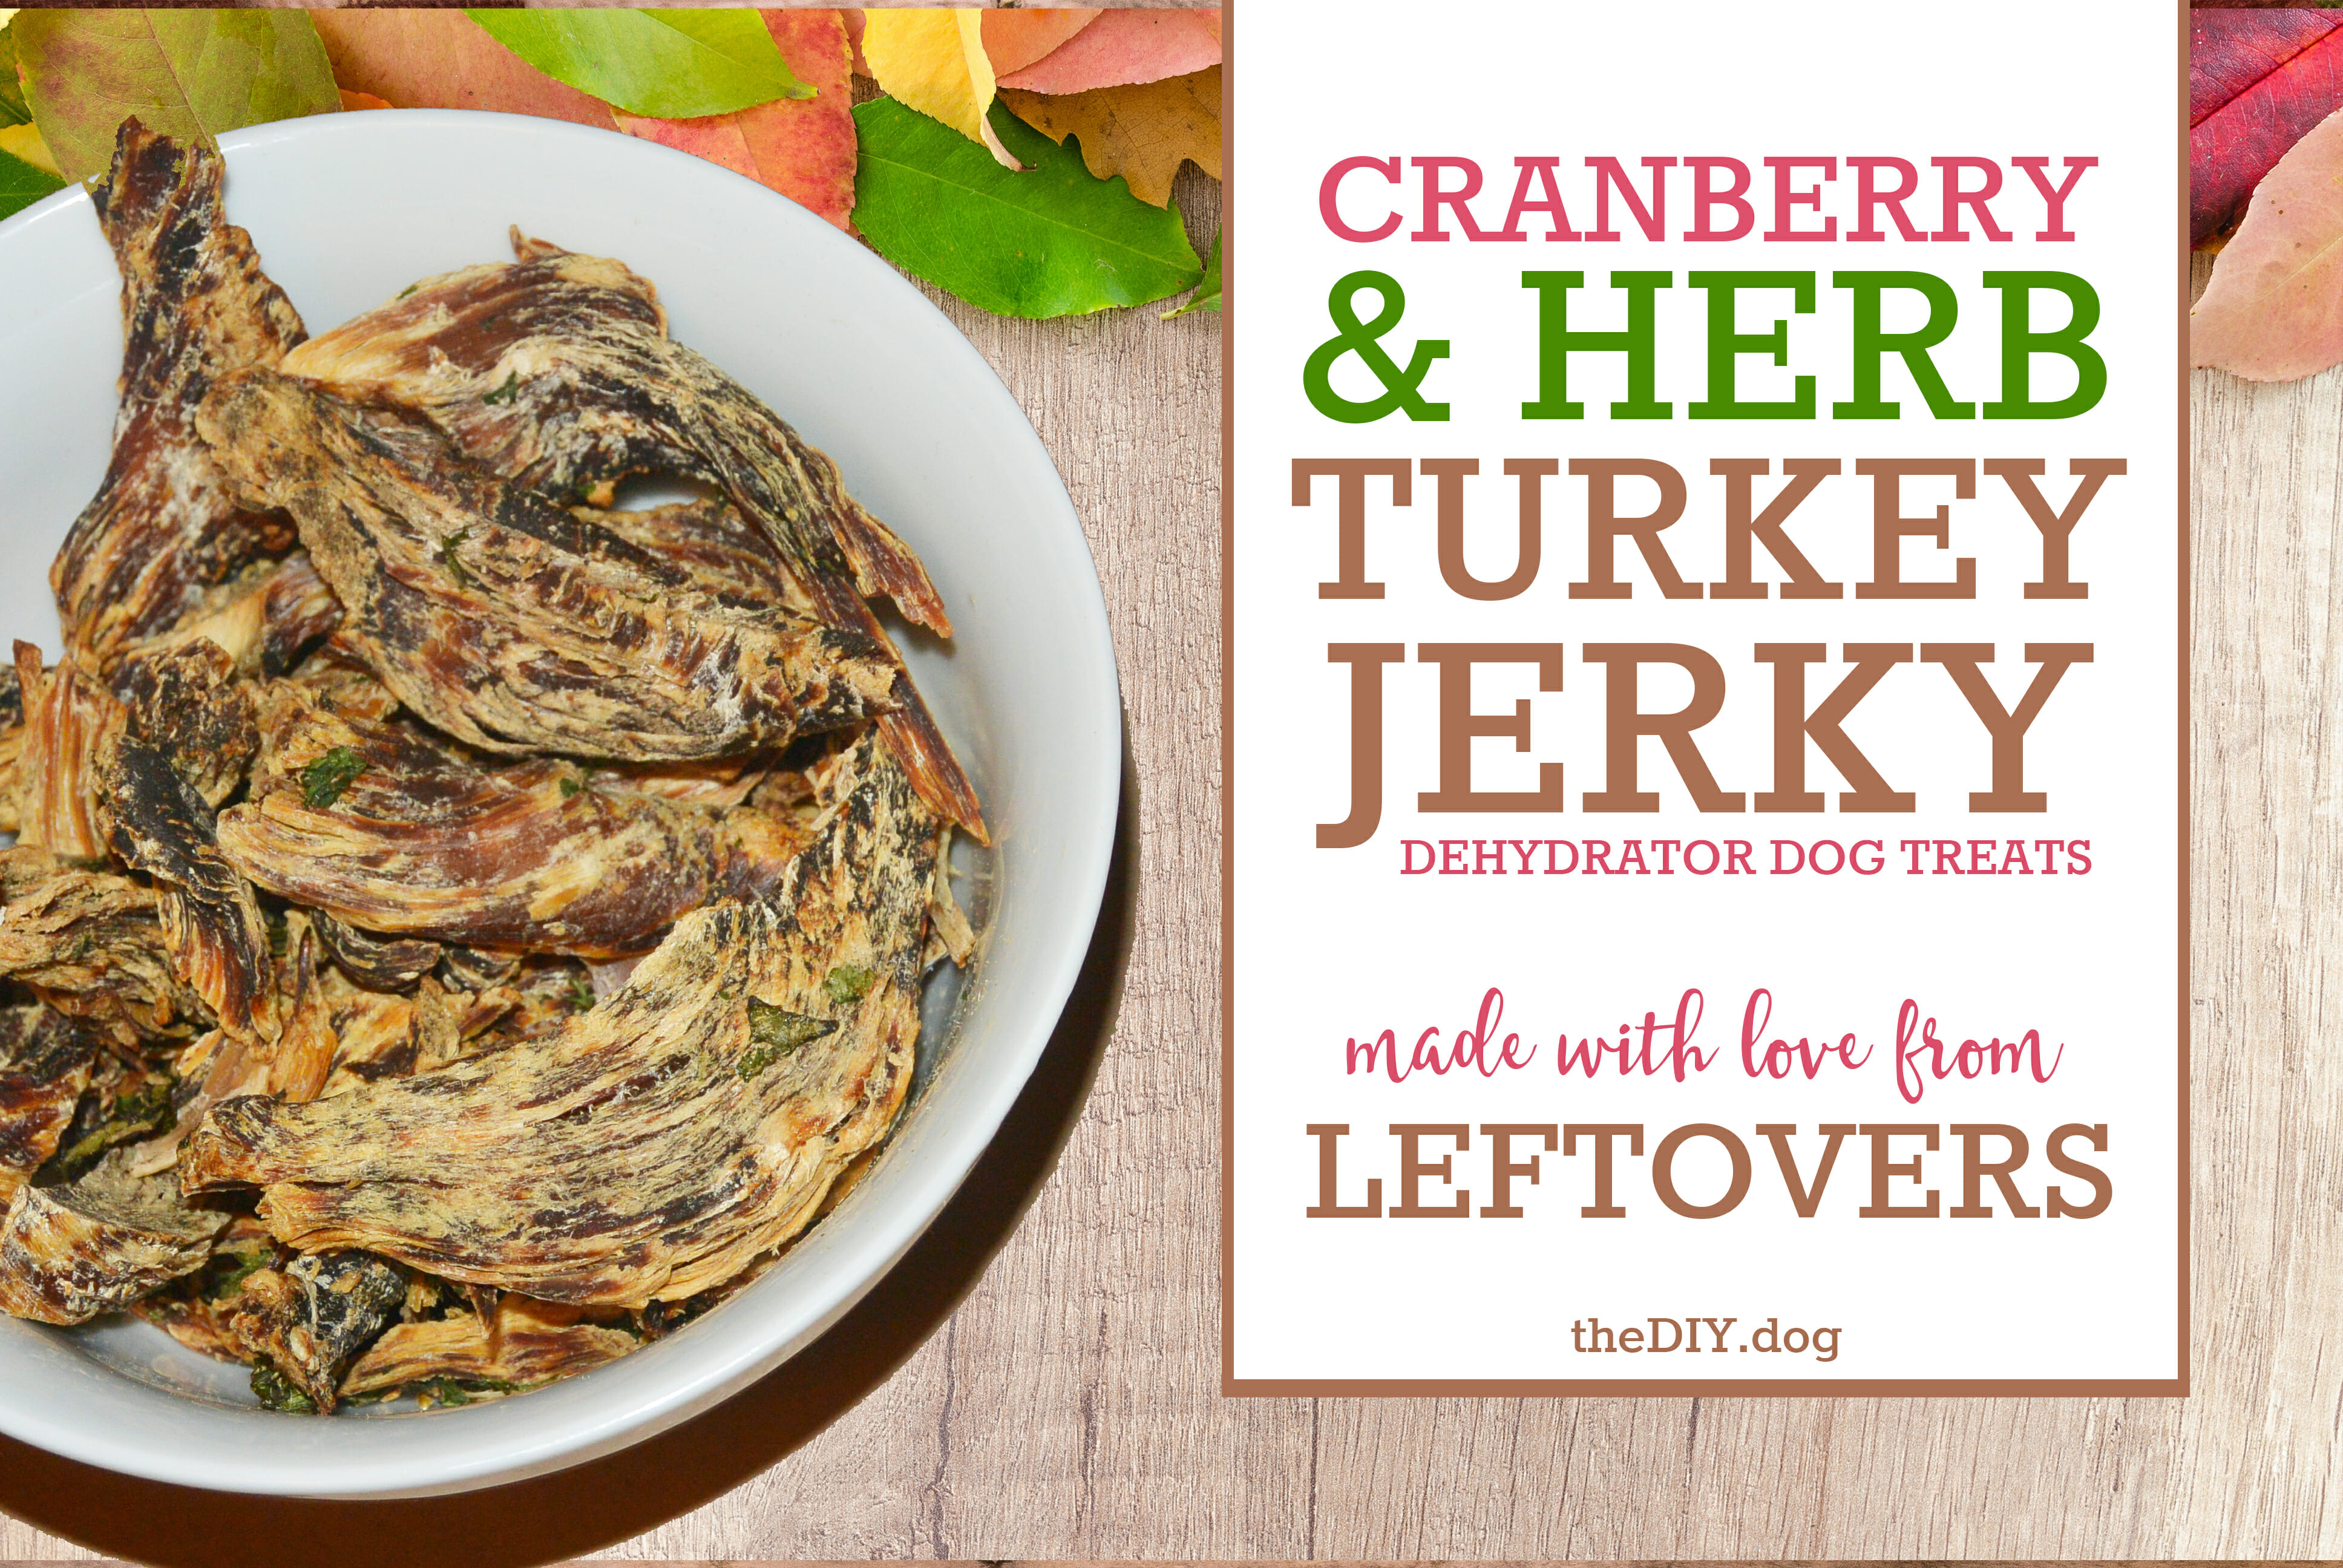 How to Make Cranberry Herb Turkey Jerky Dehydrator Dog Treats from Leftovers